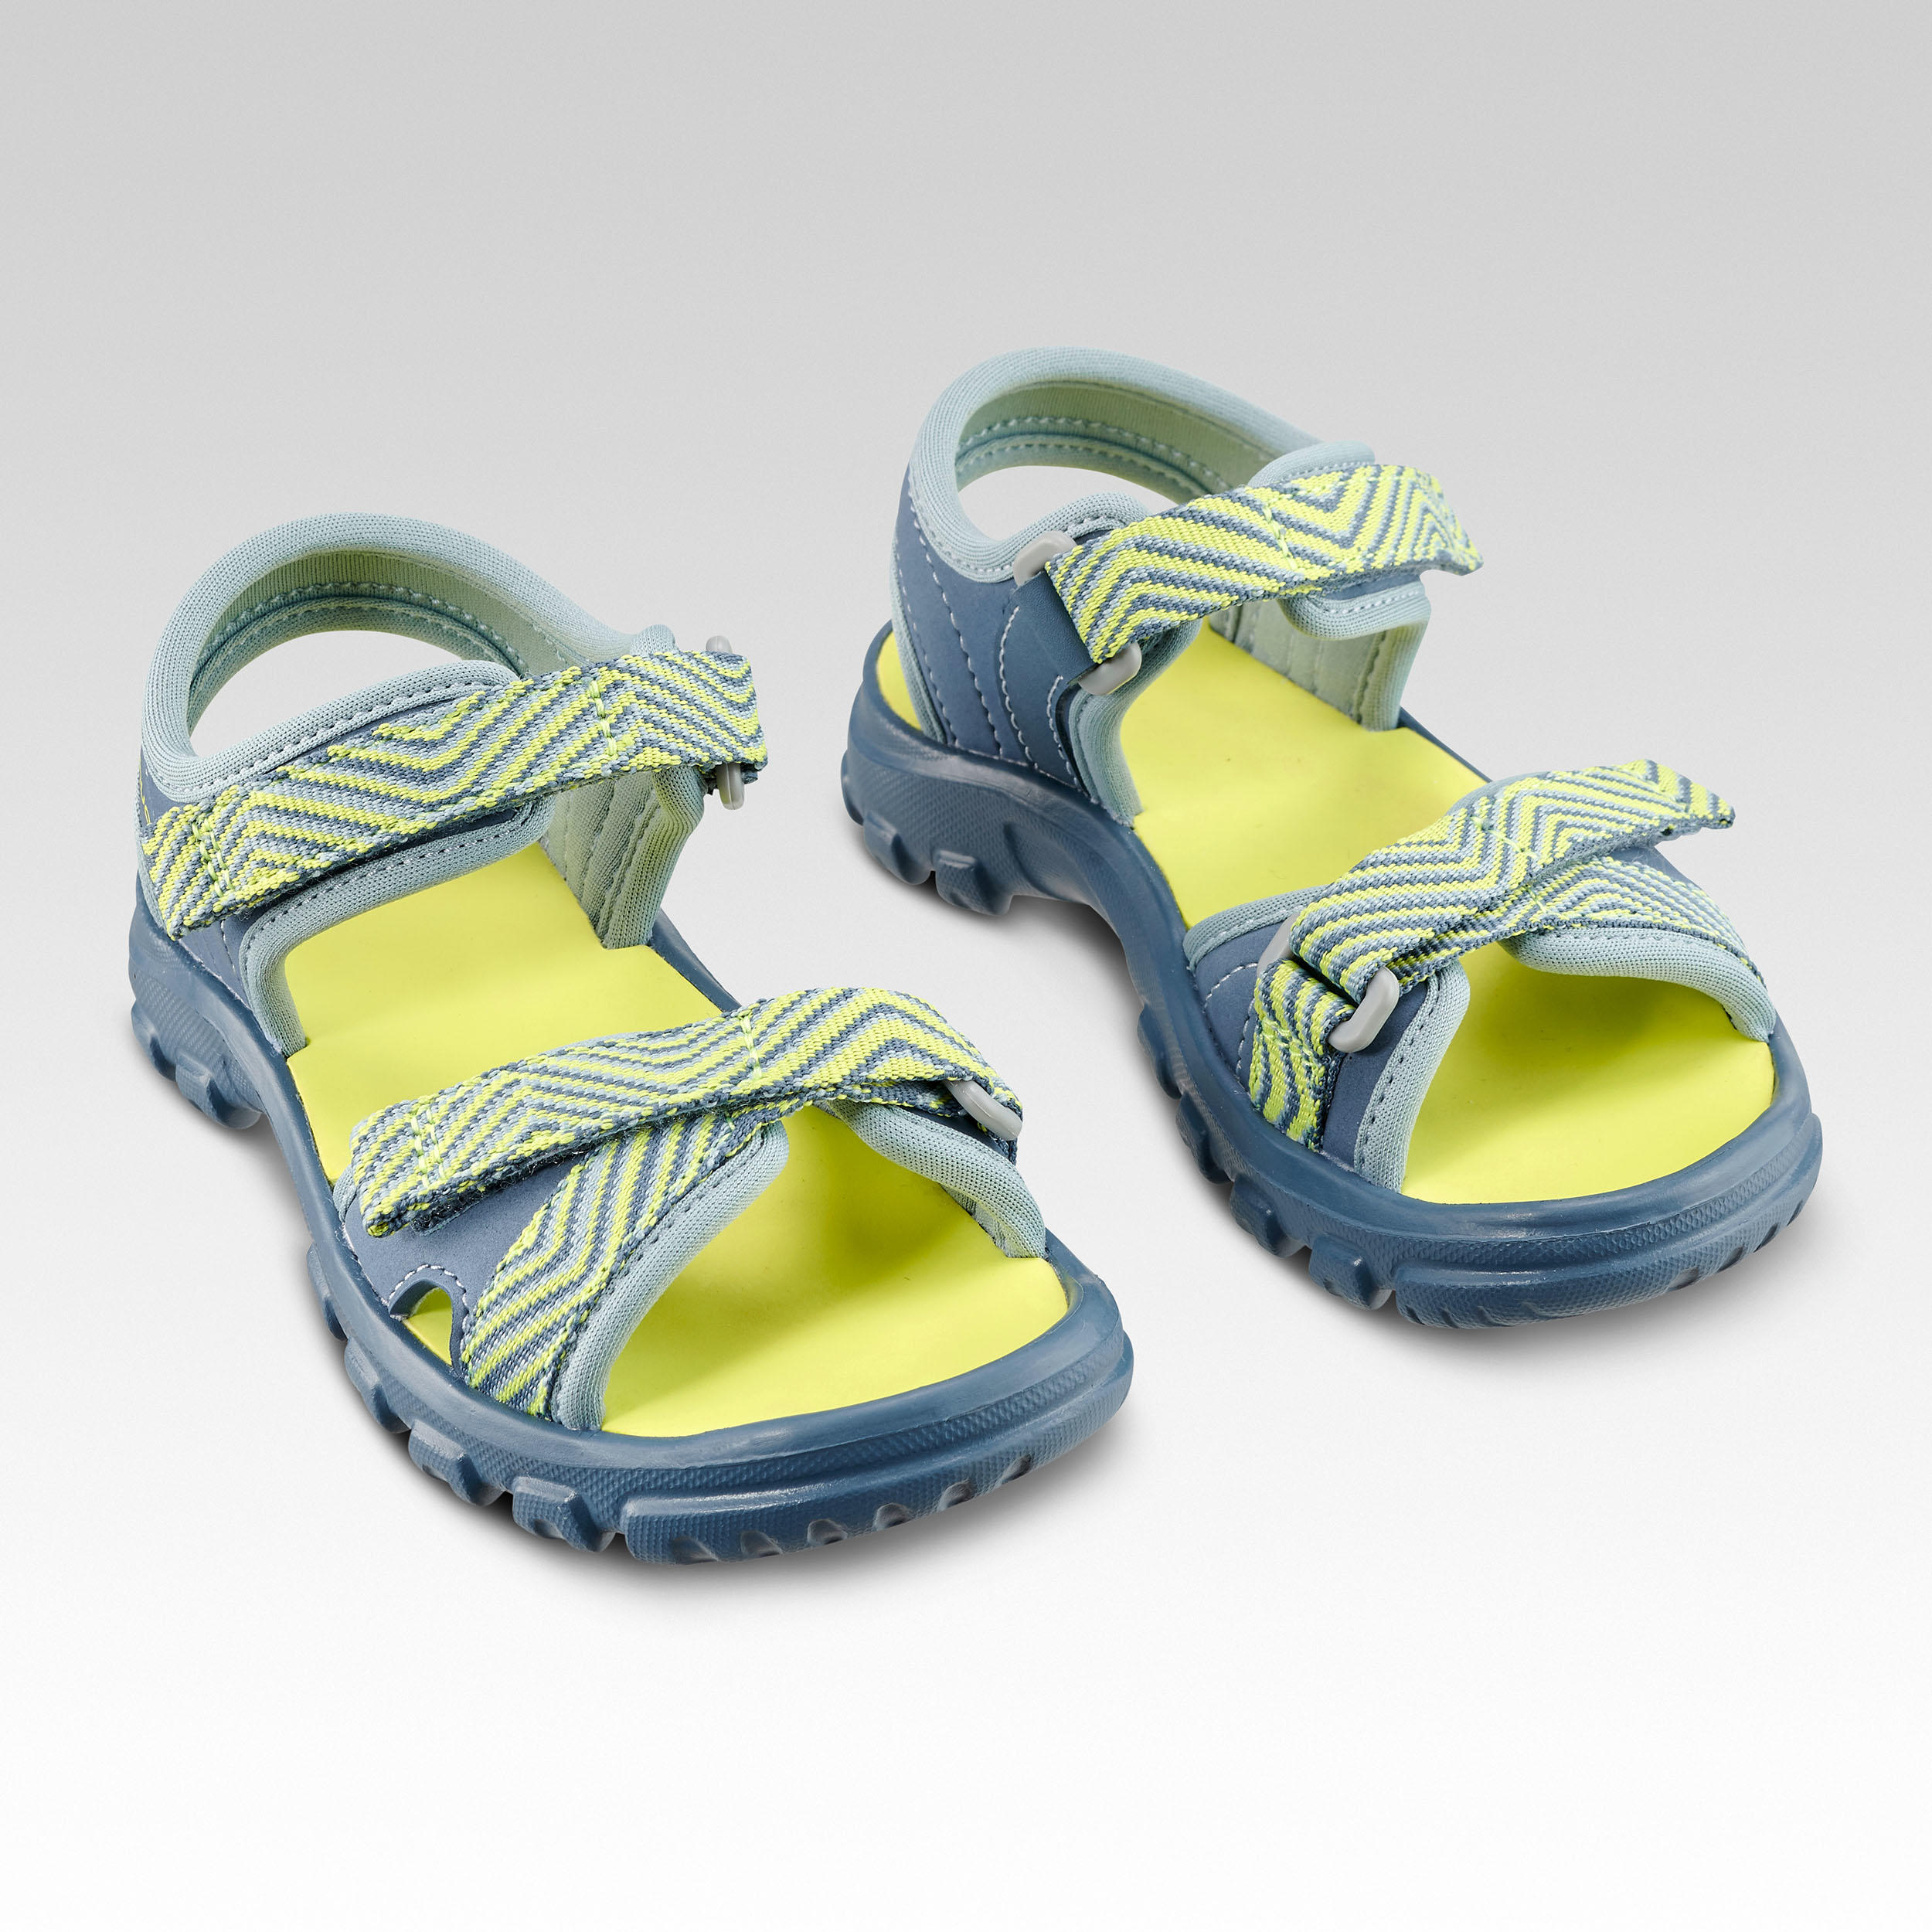 Kids' hiking sandals - Kids' MH100 blue and yellow - size 24 to 31 6/9